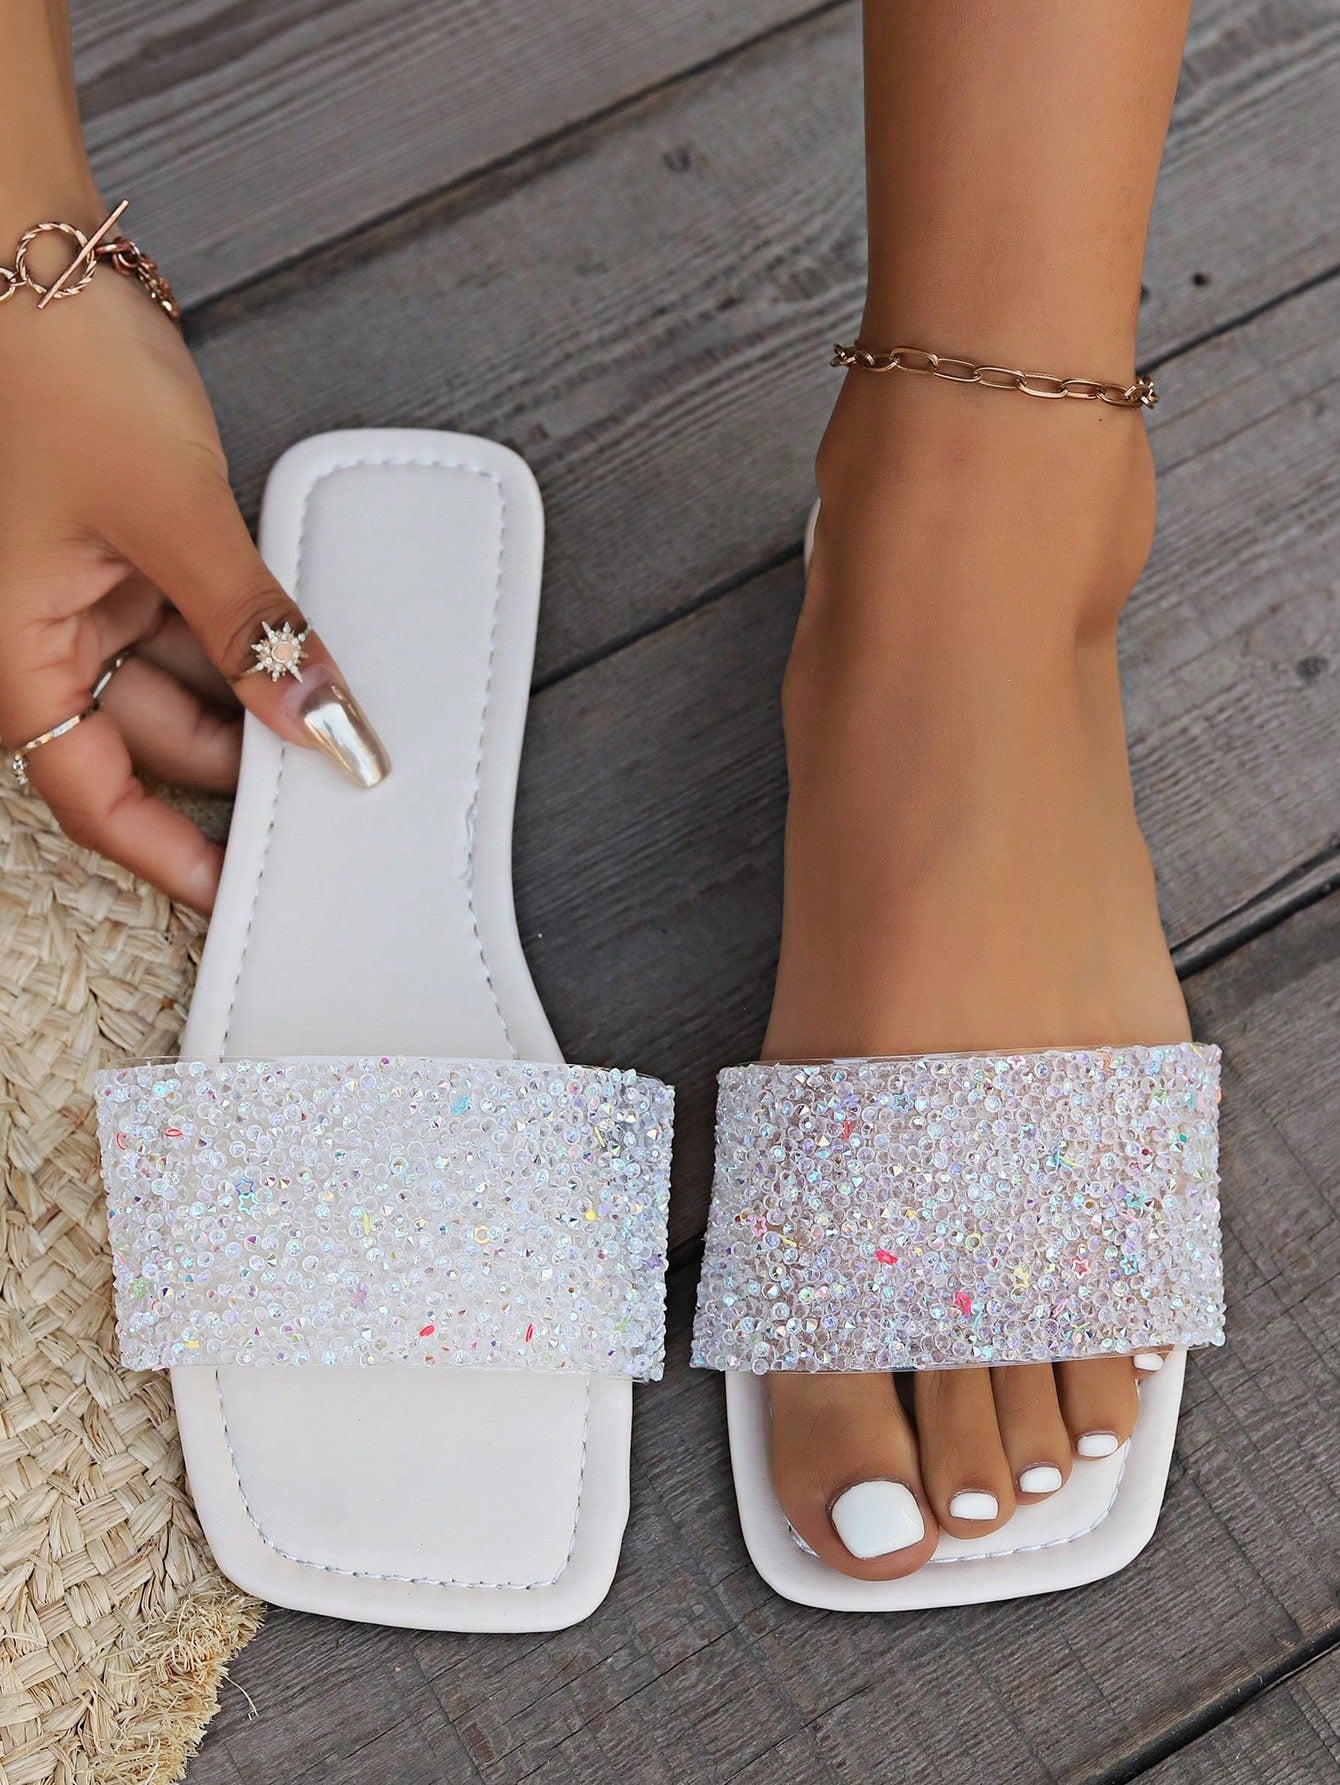 New Women Flat Sandals With Glitter Decoration, , Fashionable, Comfortable, Slimming, Suitable For Both Indoor And Outdoor, Perfect For Beach, Travel, Vacation, Available In Silver, Golden, And Black Colors-Beige-1